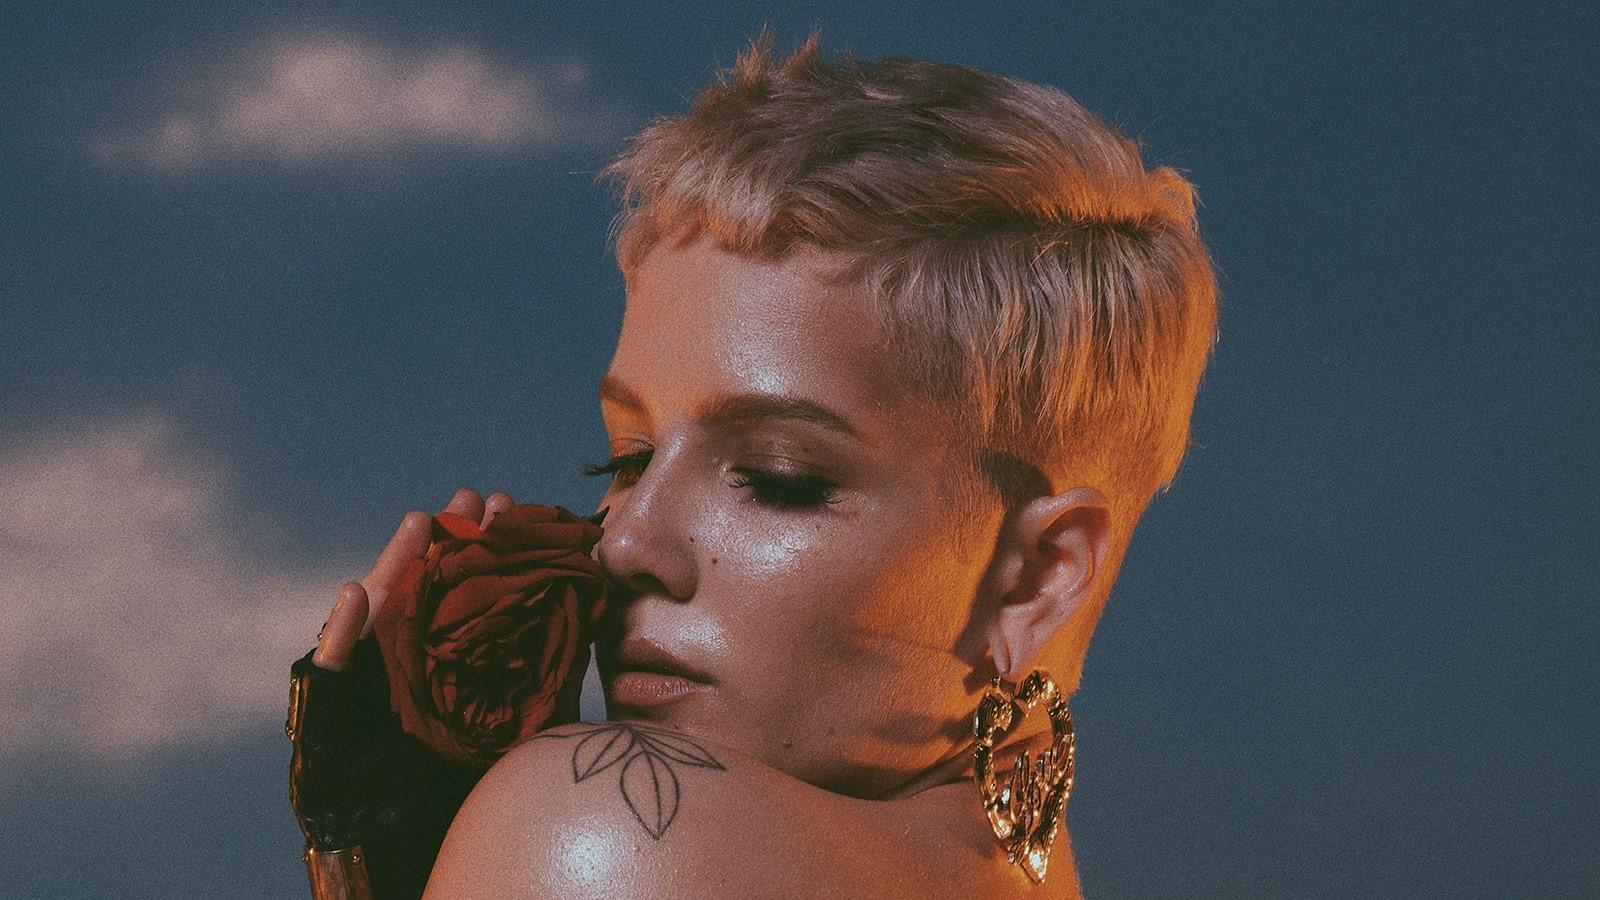 Halsey on miscarriage, the media & being treated like a meme